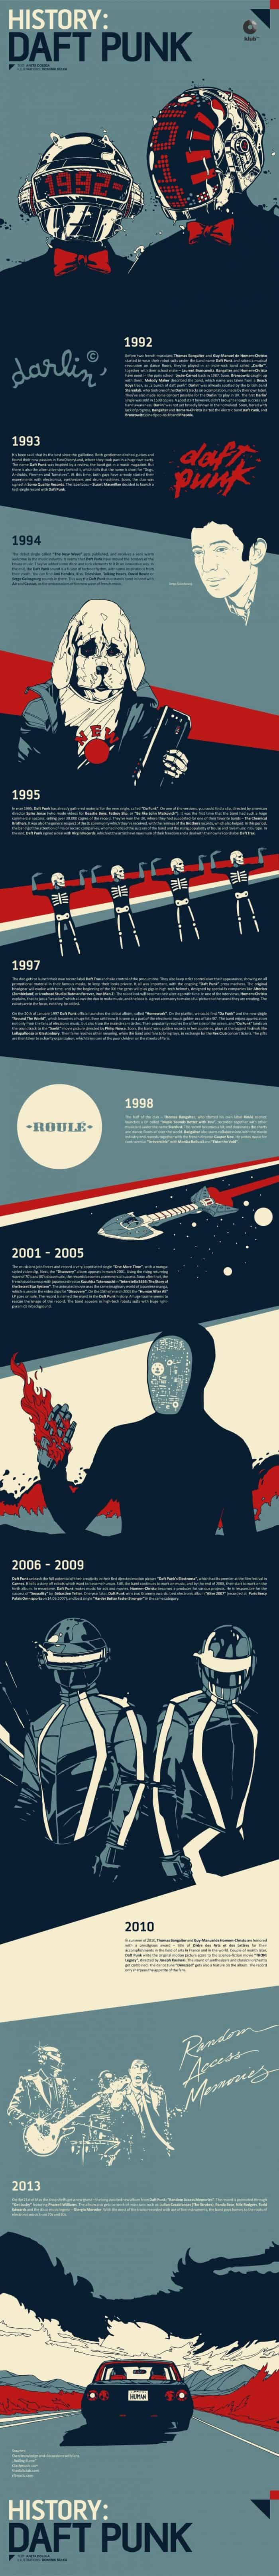 History of Daft Punk Infographic